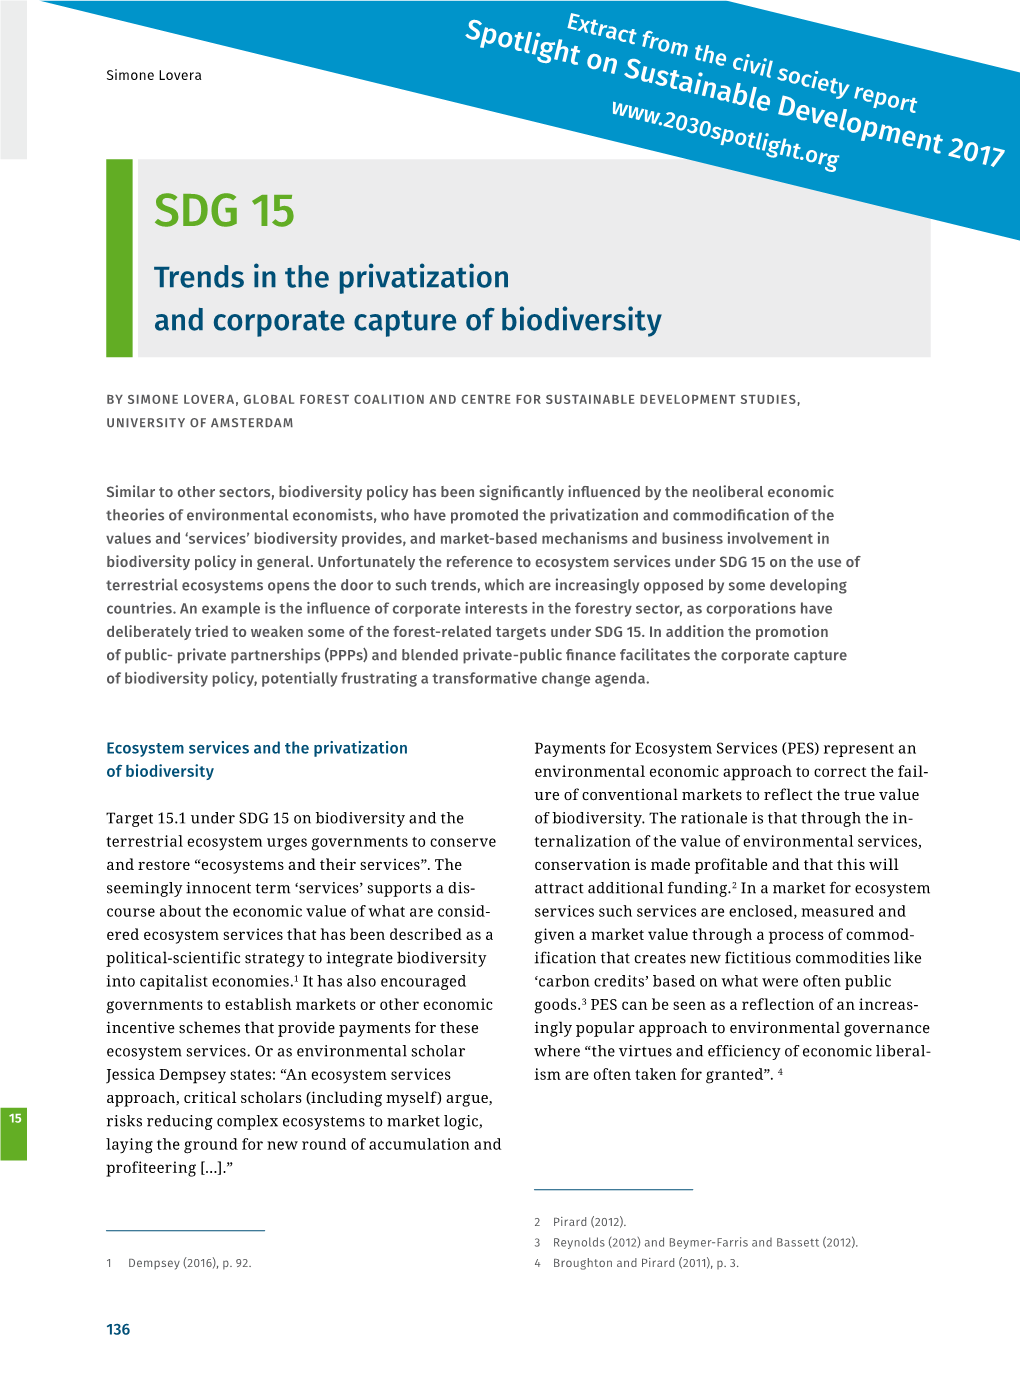 SDG 15 Trends in the Privatization and Corporate Capture of Biodiversity